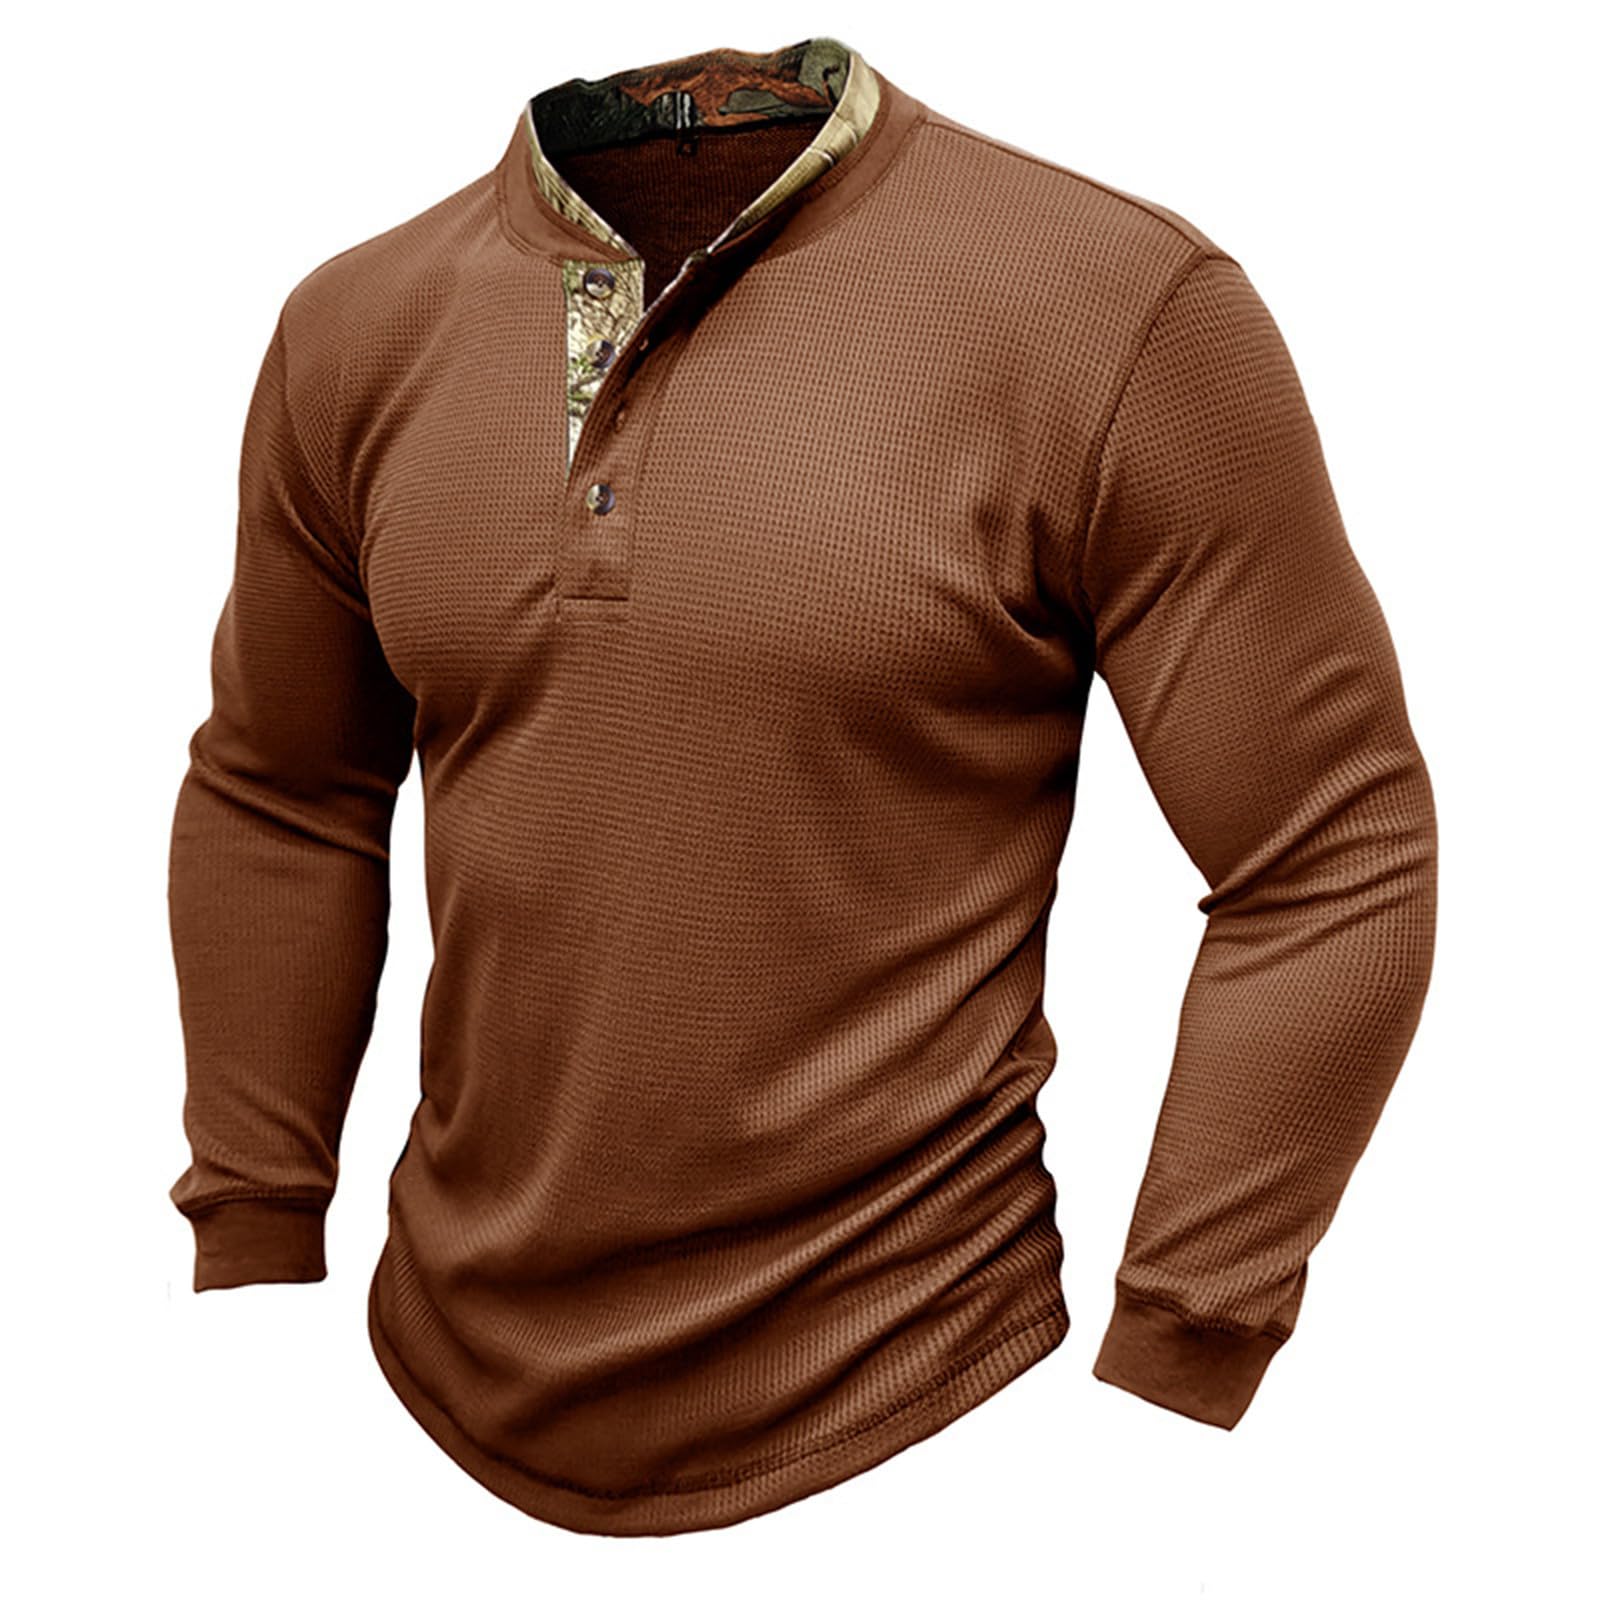 Mens Button V Neck Tee Shirt Stylish Workout Tee Long Sleeve Muscle Fit T-Shirt Soft Casual Athletic Tees Tops